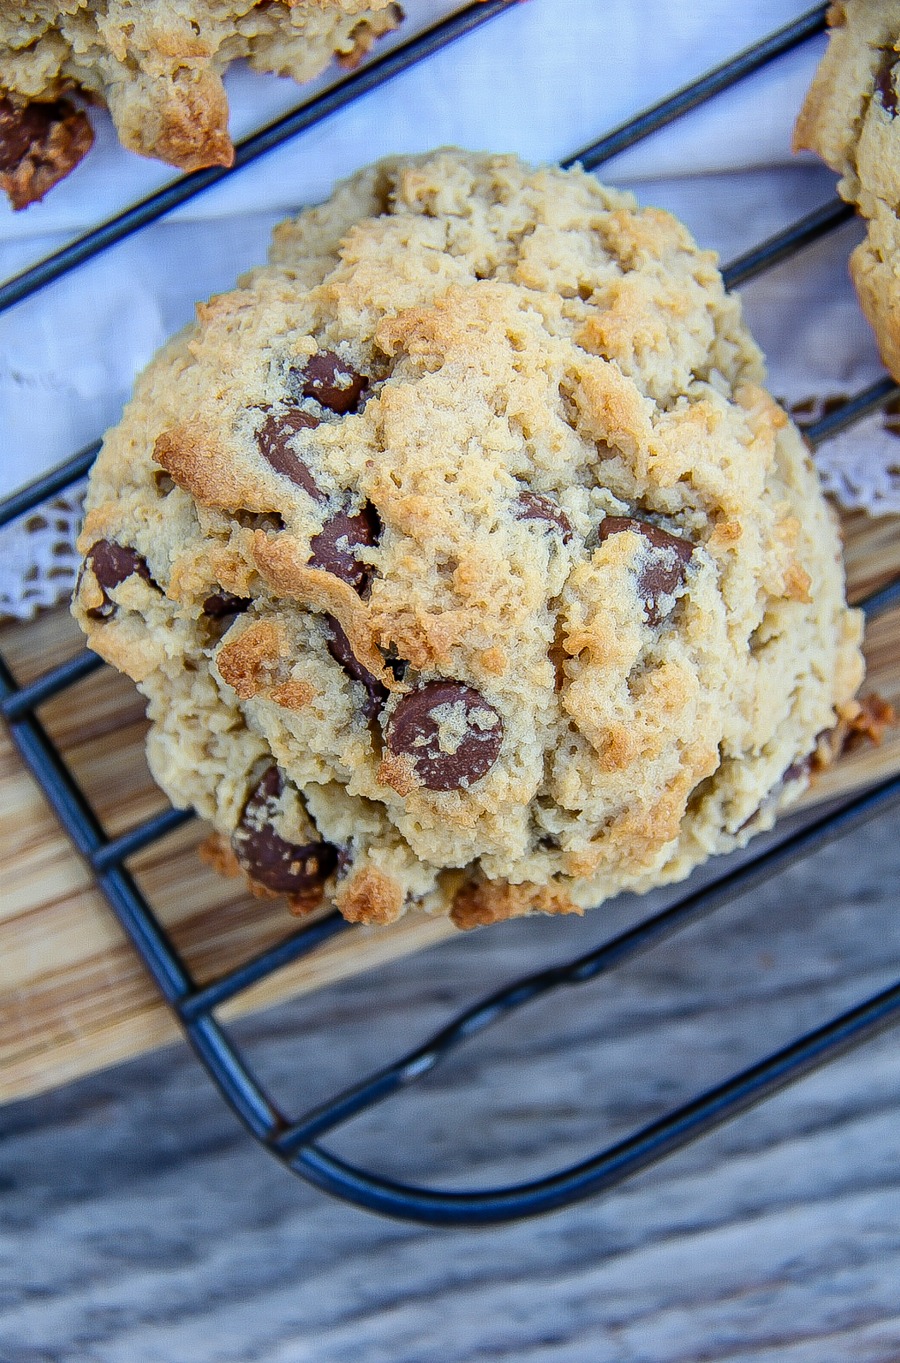 gluten-free chocolate chip cookies that weren't flattened before baking so baked in a mound